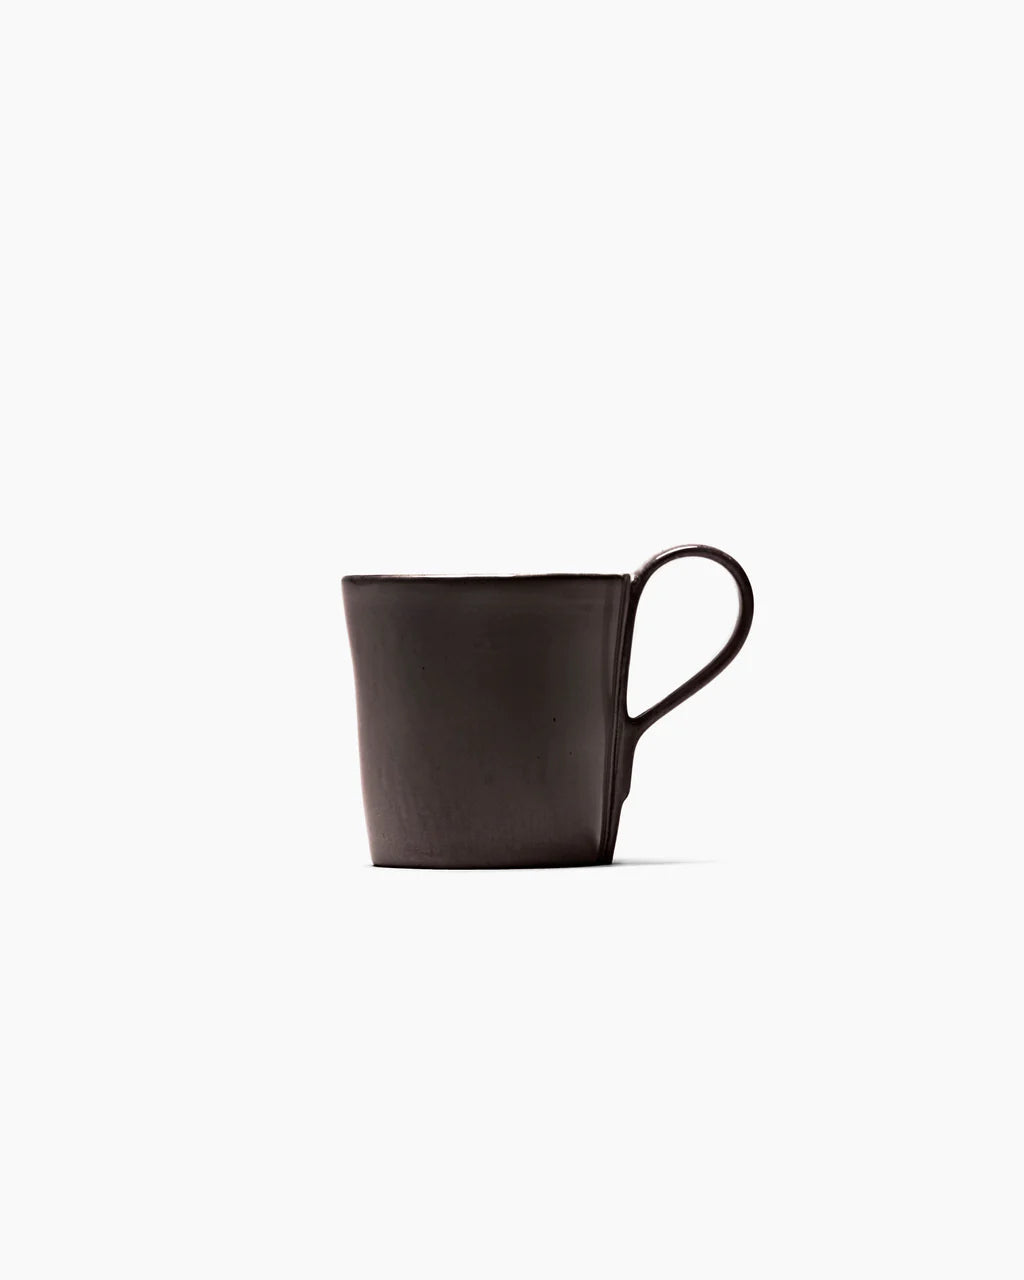 Ebony Coffee Cup with a Handle